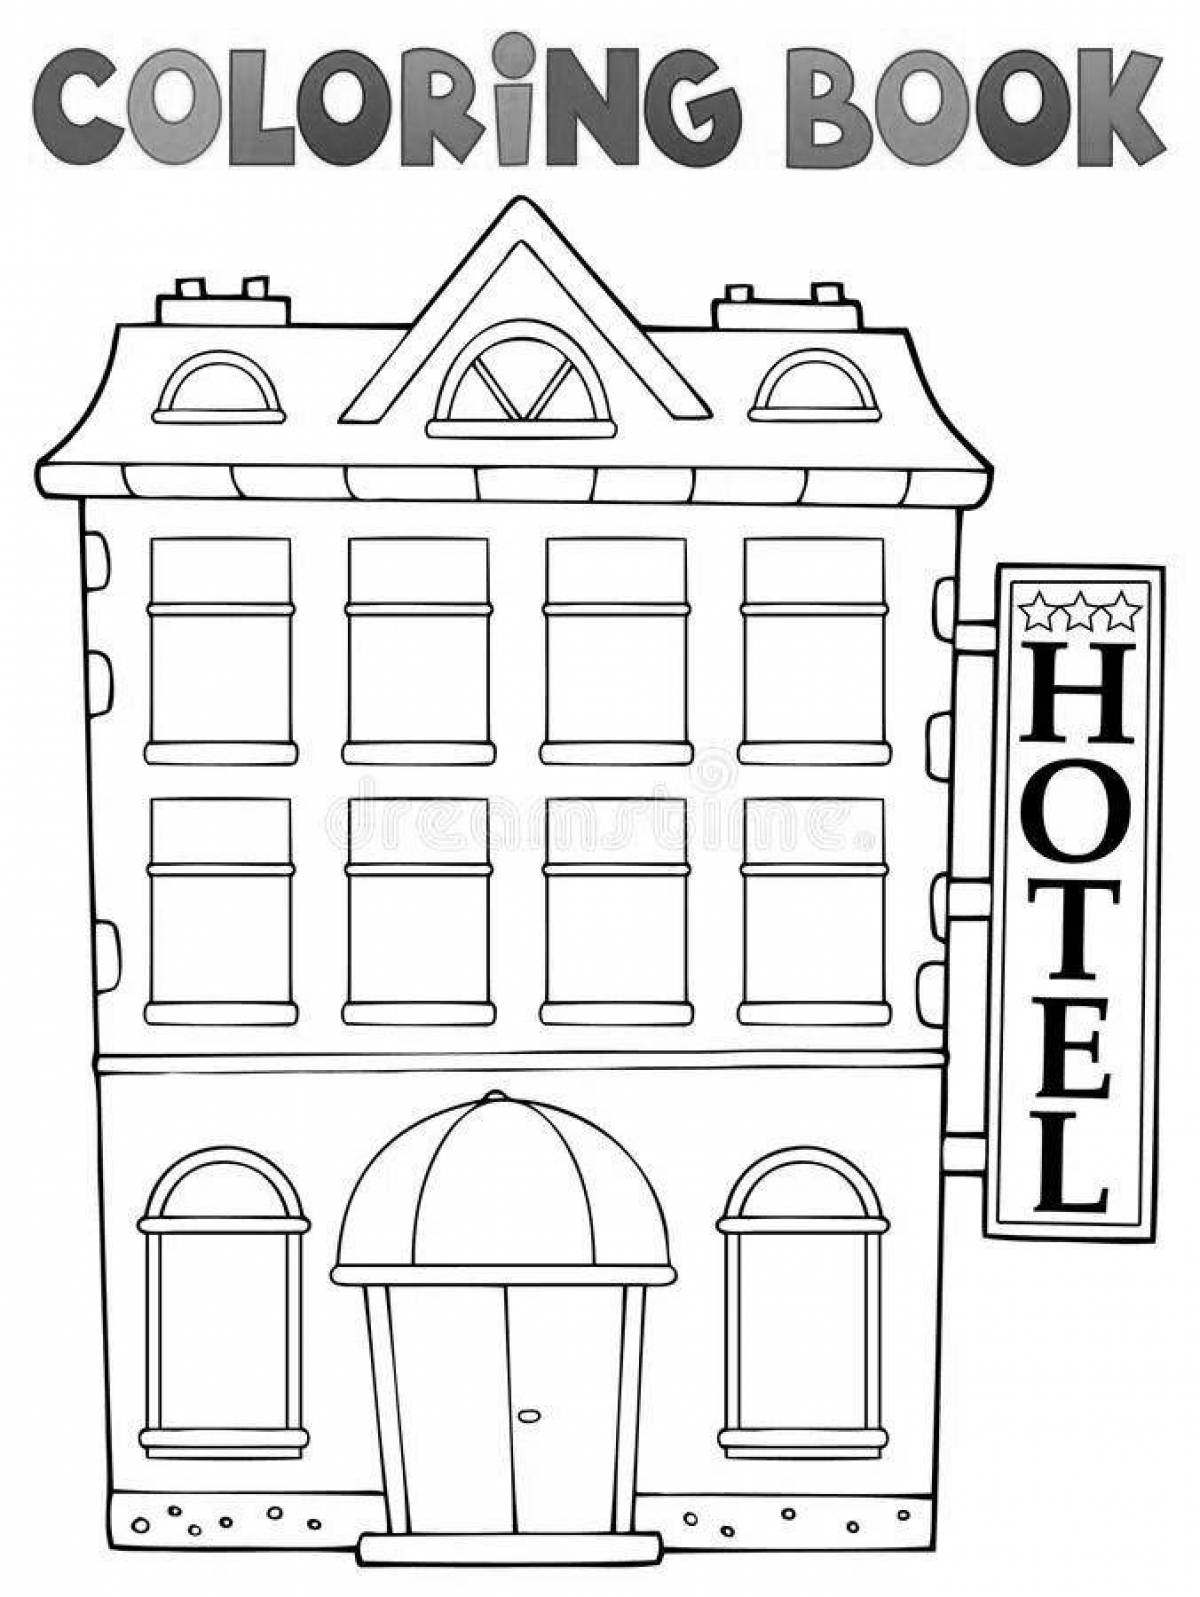 Coloring page dazzling hotel